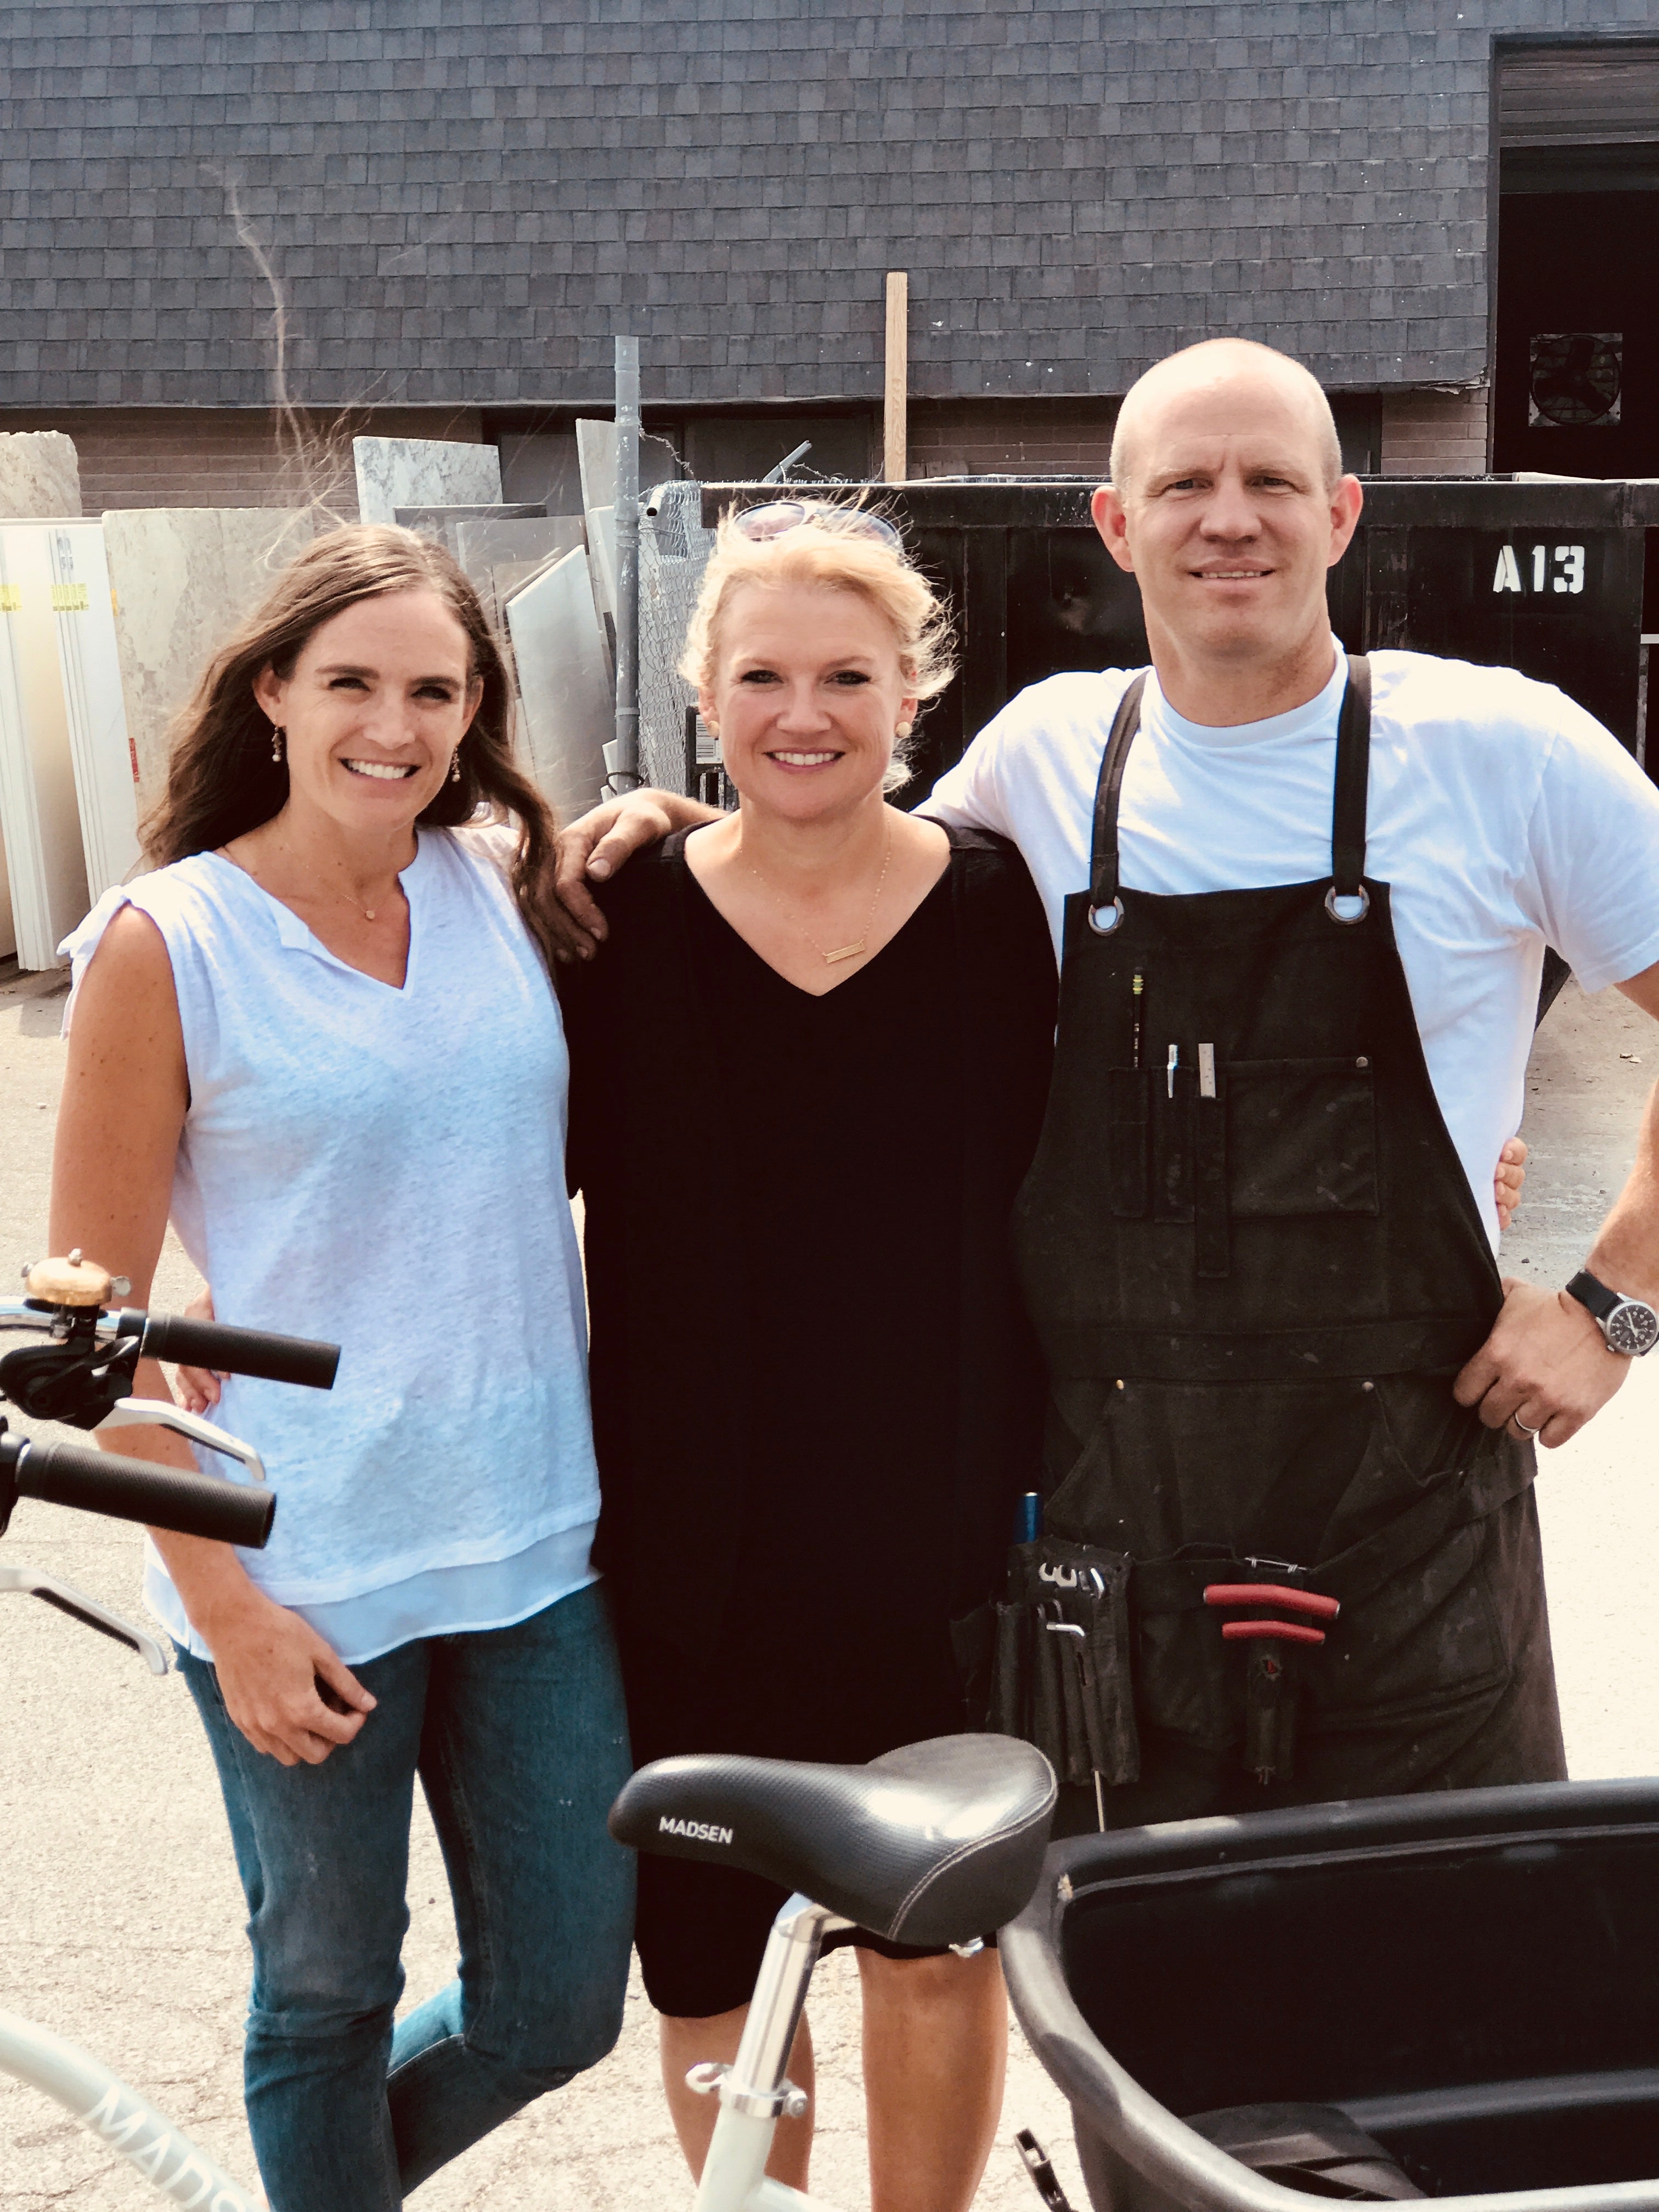 Changing Lives - Alissa's inspiring journey to weight loss and freedom - with her Madsen Bucket Bike. Filming and Cinematography by Dan Kettle, Elements in Motion Films